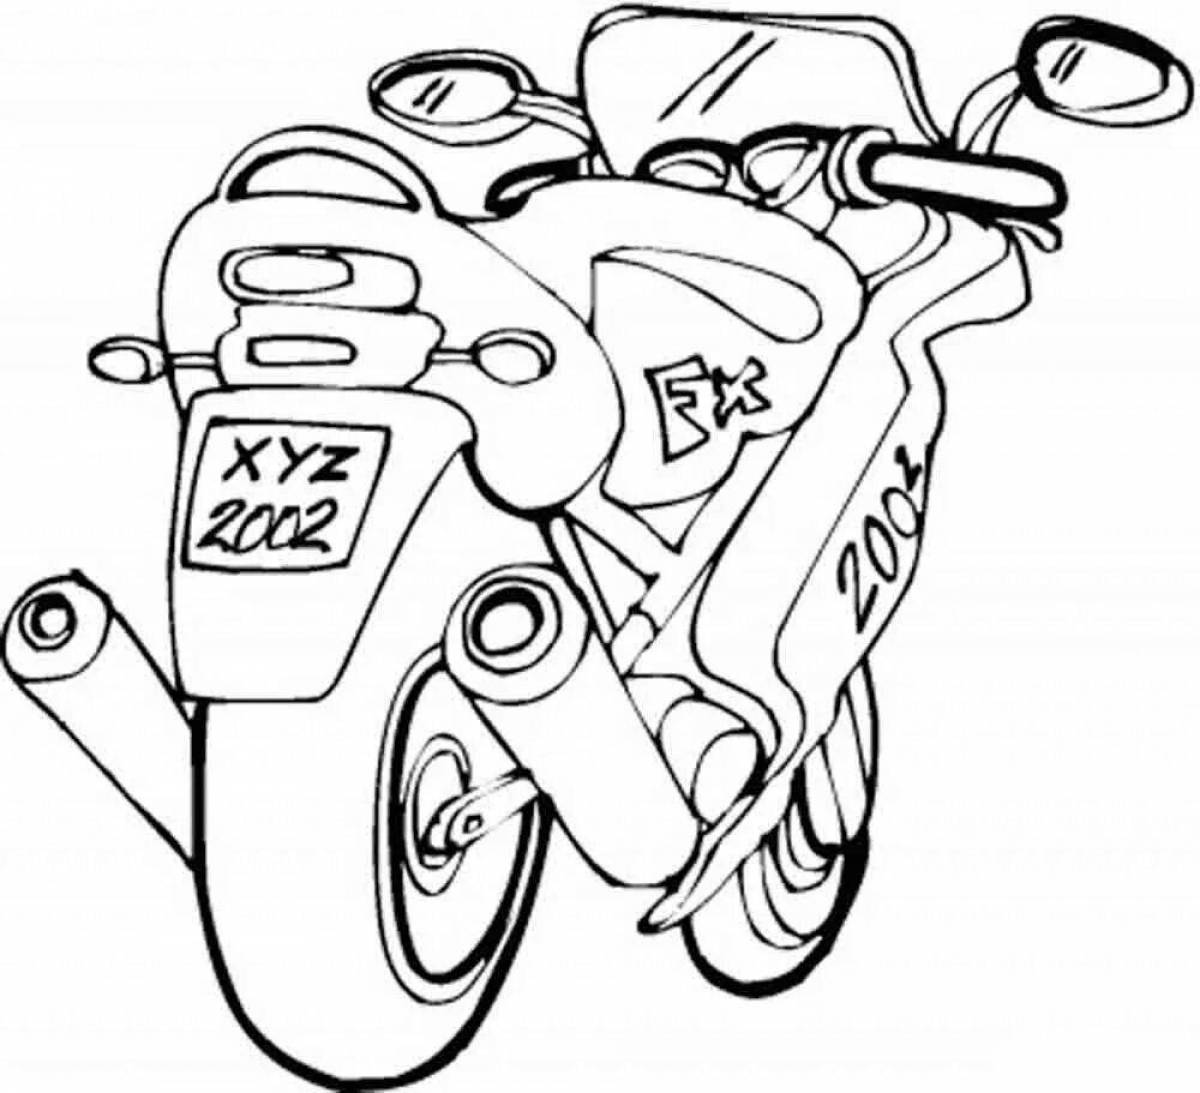 Fabulous motorcycles coloring book for children 6-7 years old